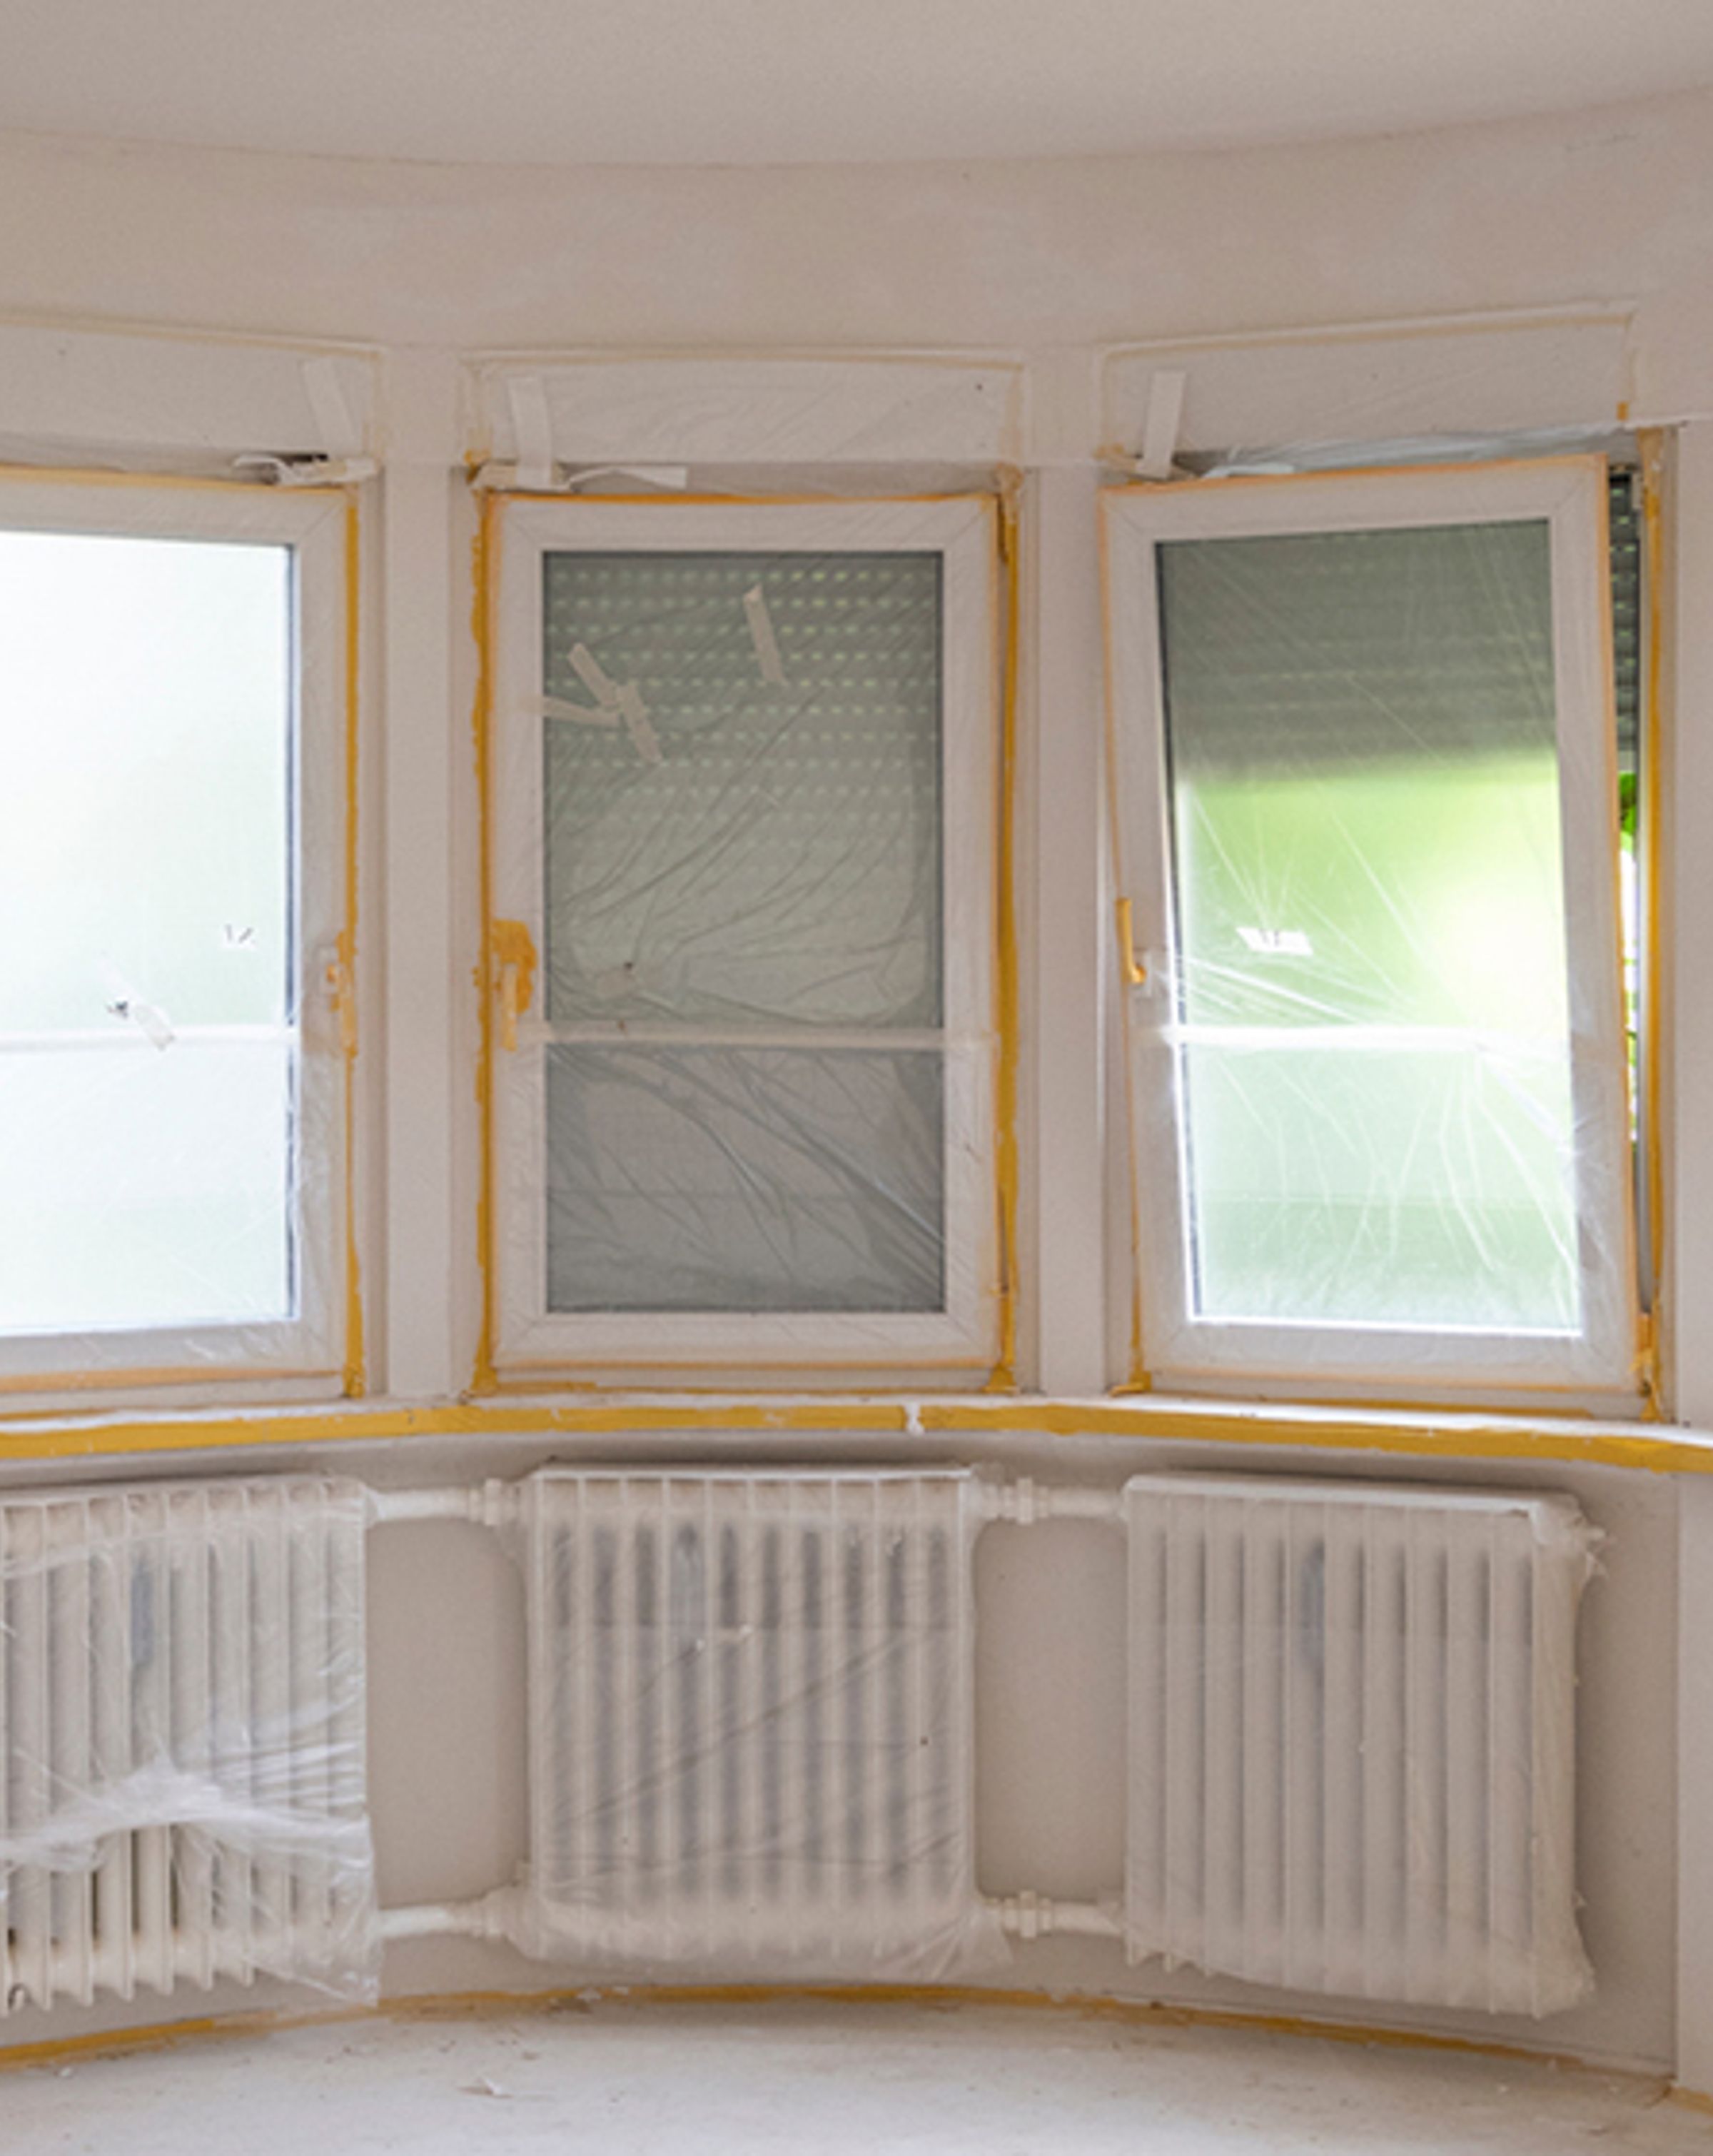 Three windows with orange masking tap around around them, with a bar heater under each covered in plastic, in preparation for the room to be painted